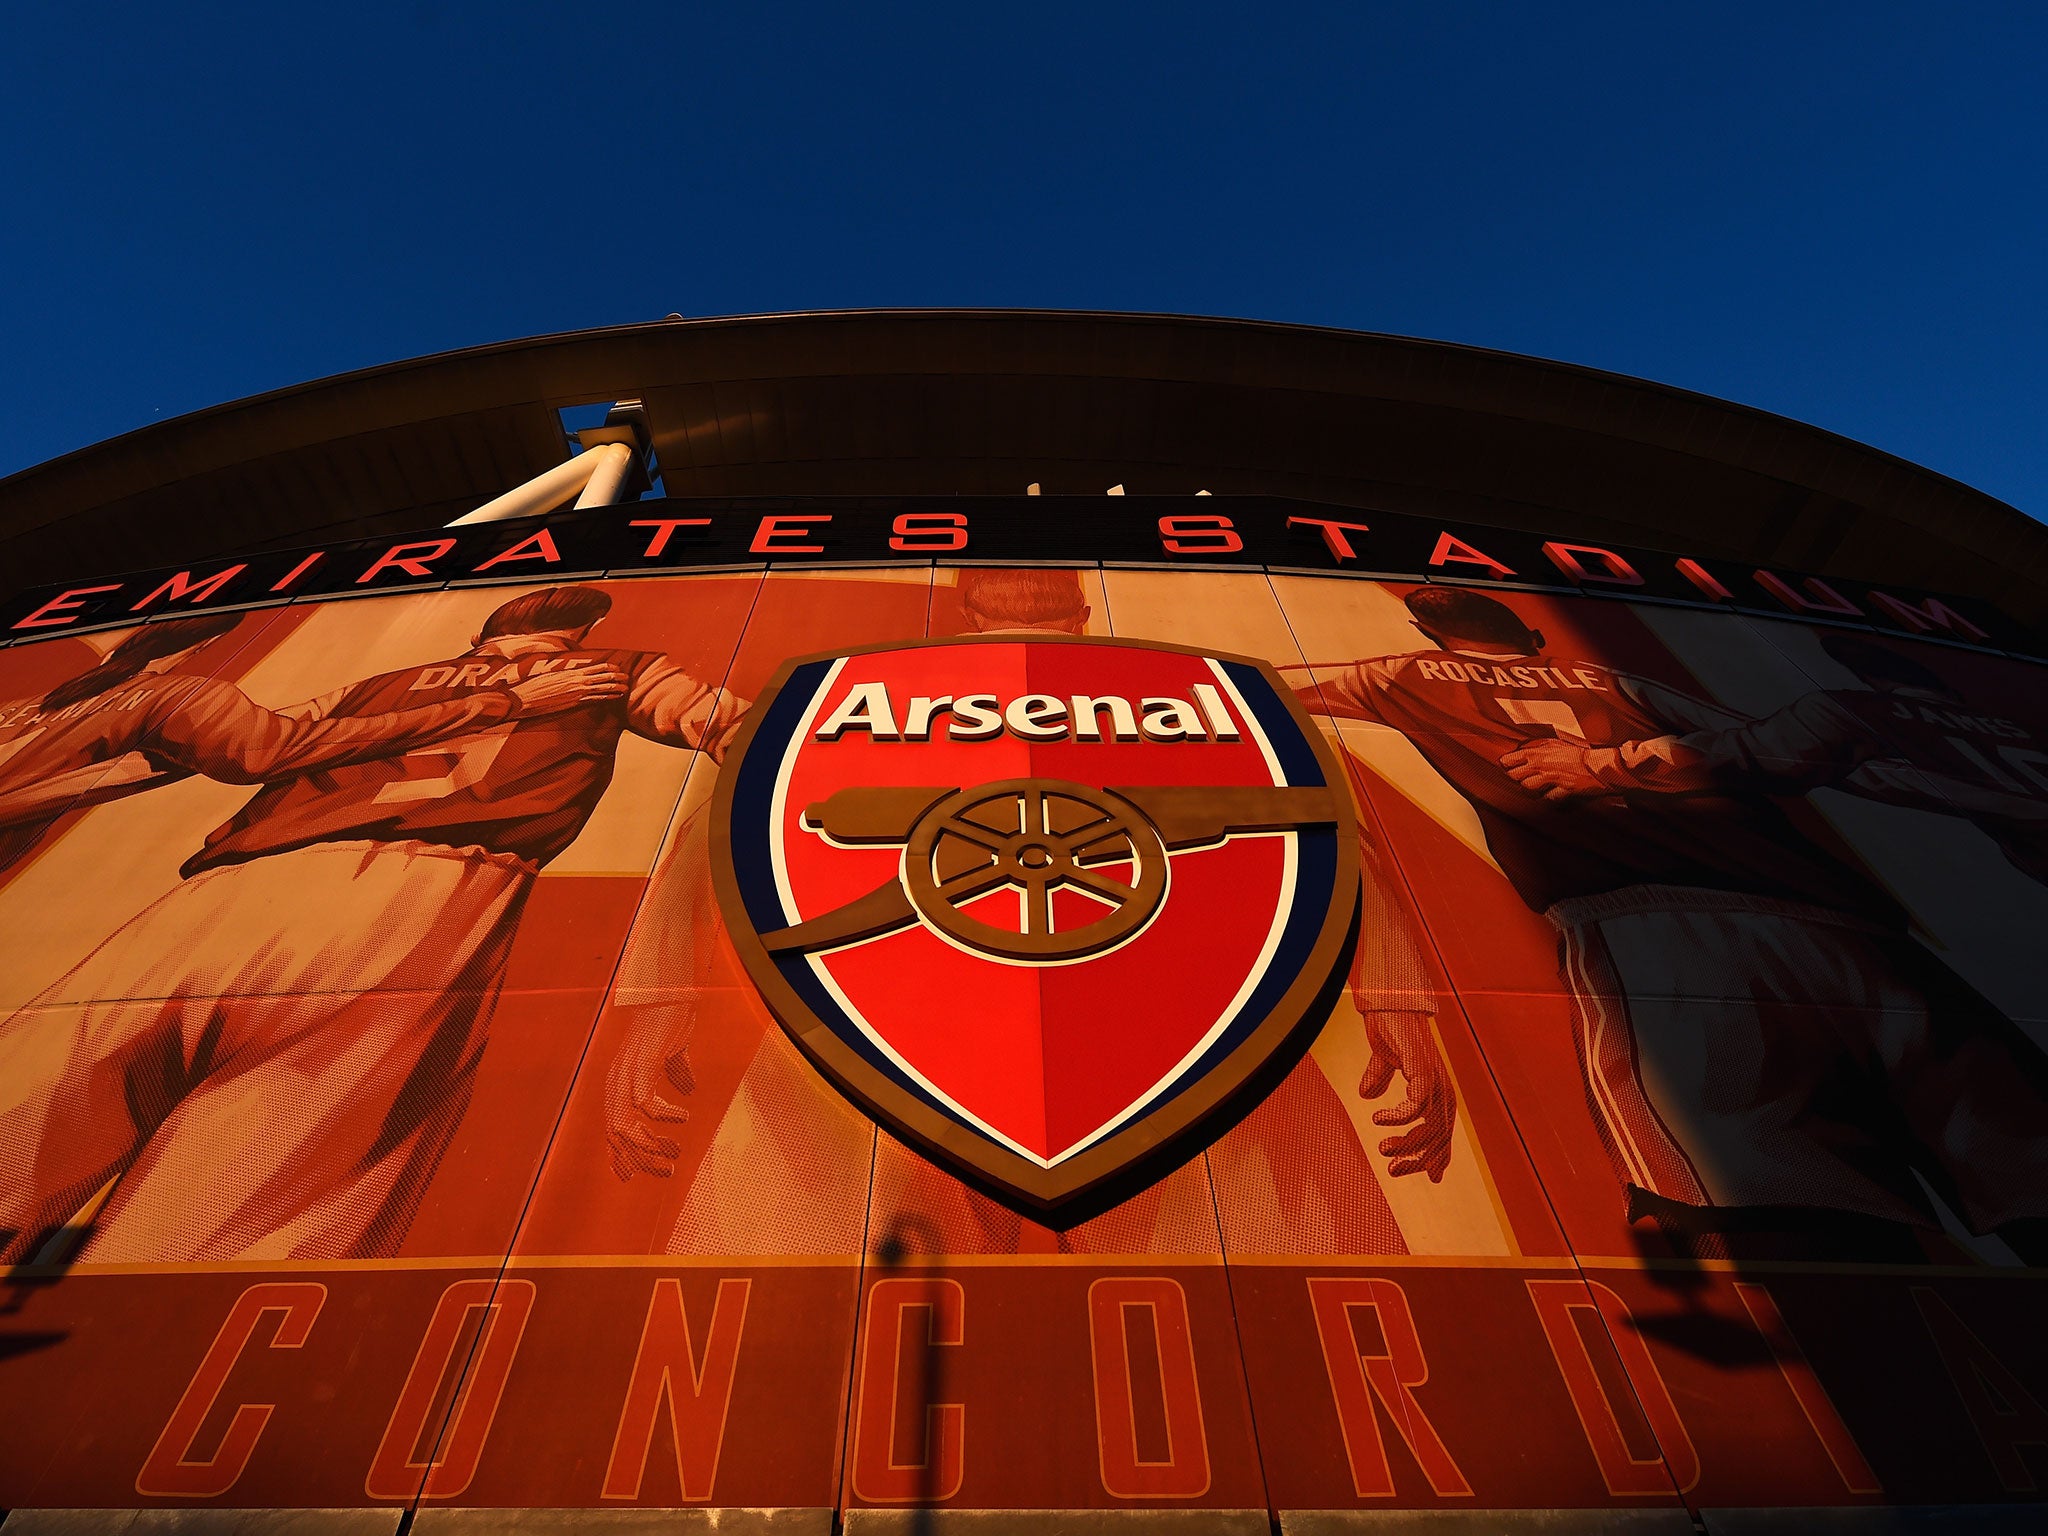 The Emirates Stadium lit up in the evening ahead of Arsenal v Newcastle